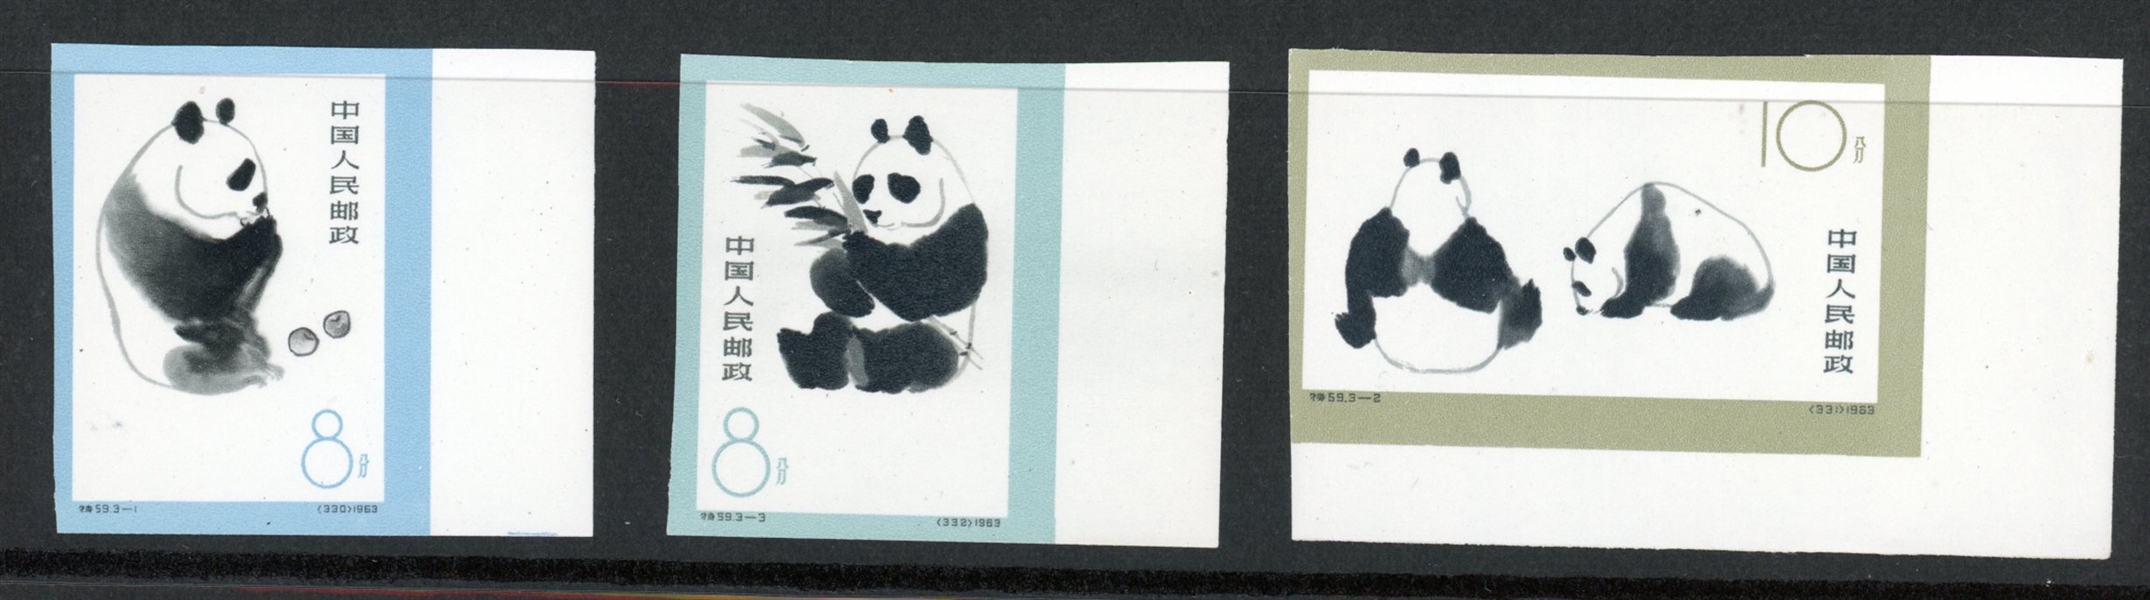 People's Republic of China Scott 708-710 MH Complete Set - IMPERF Pandas (SCV $330)